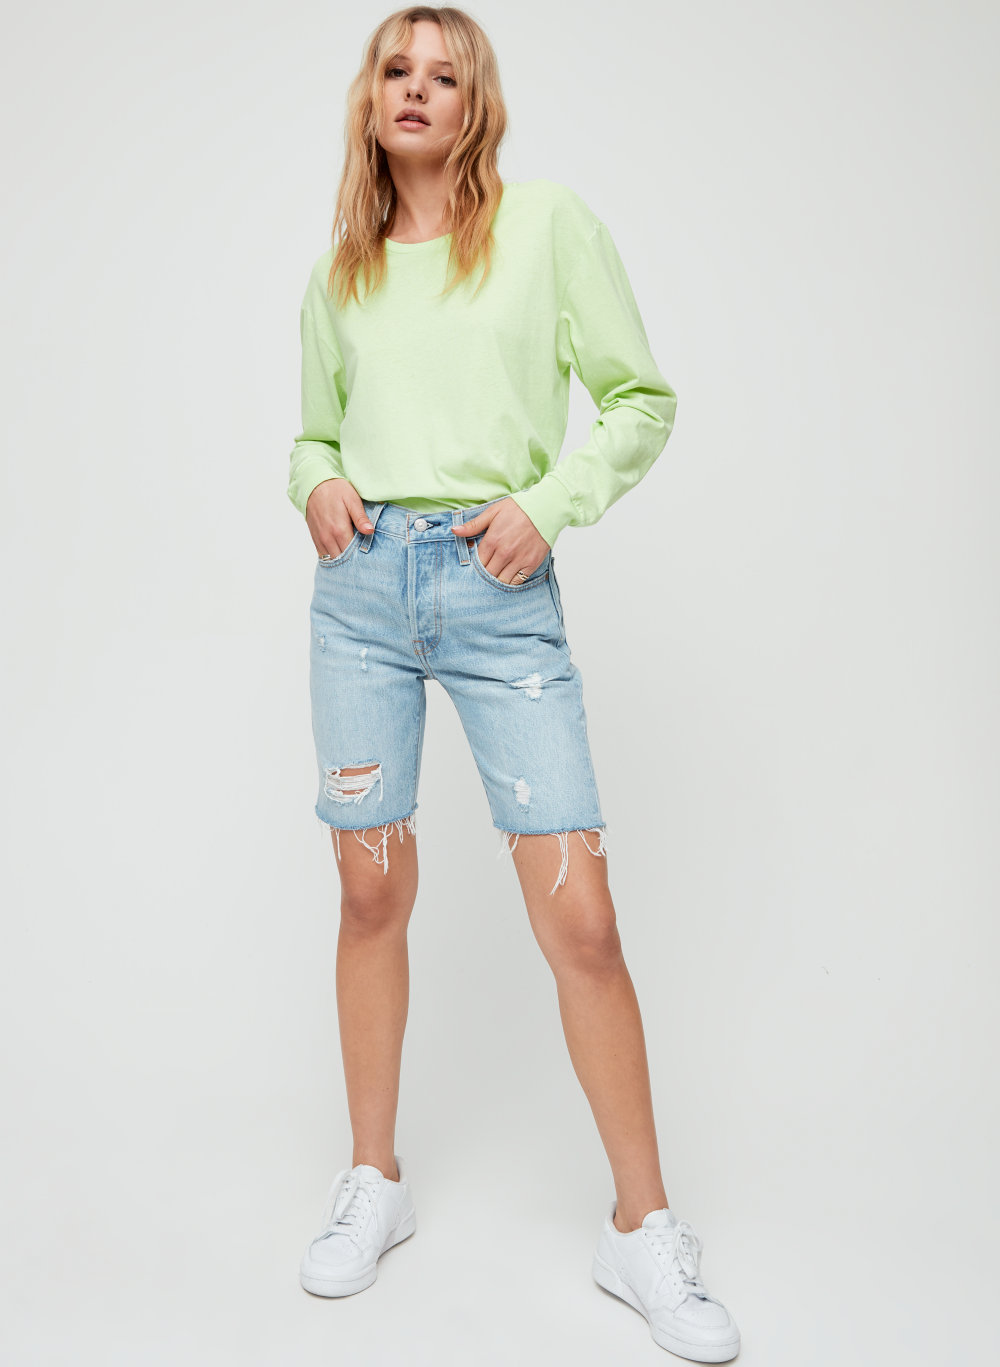 501 slouch shorts